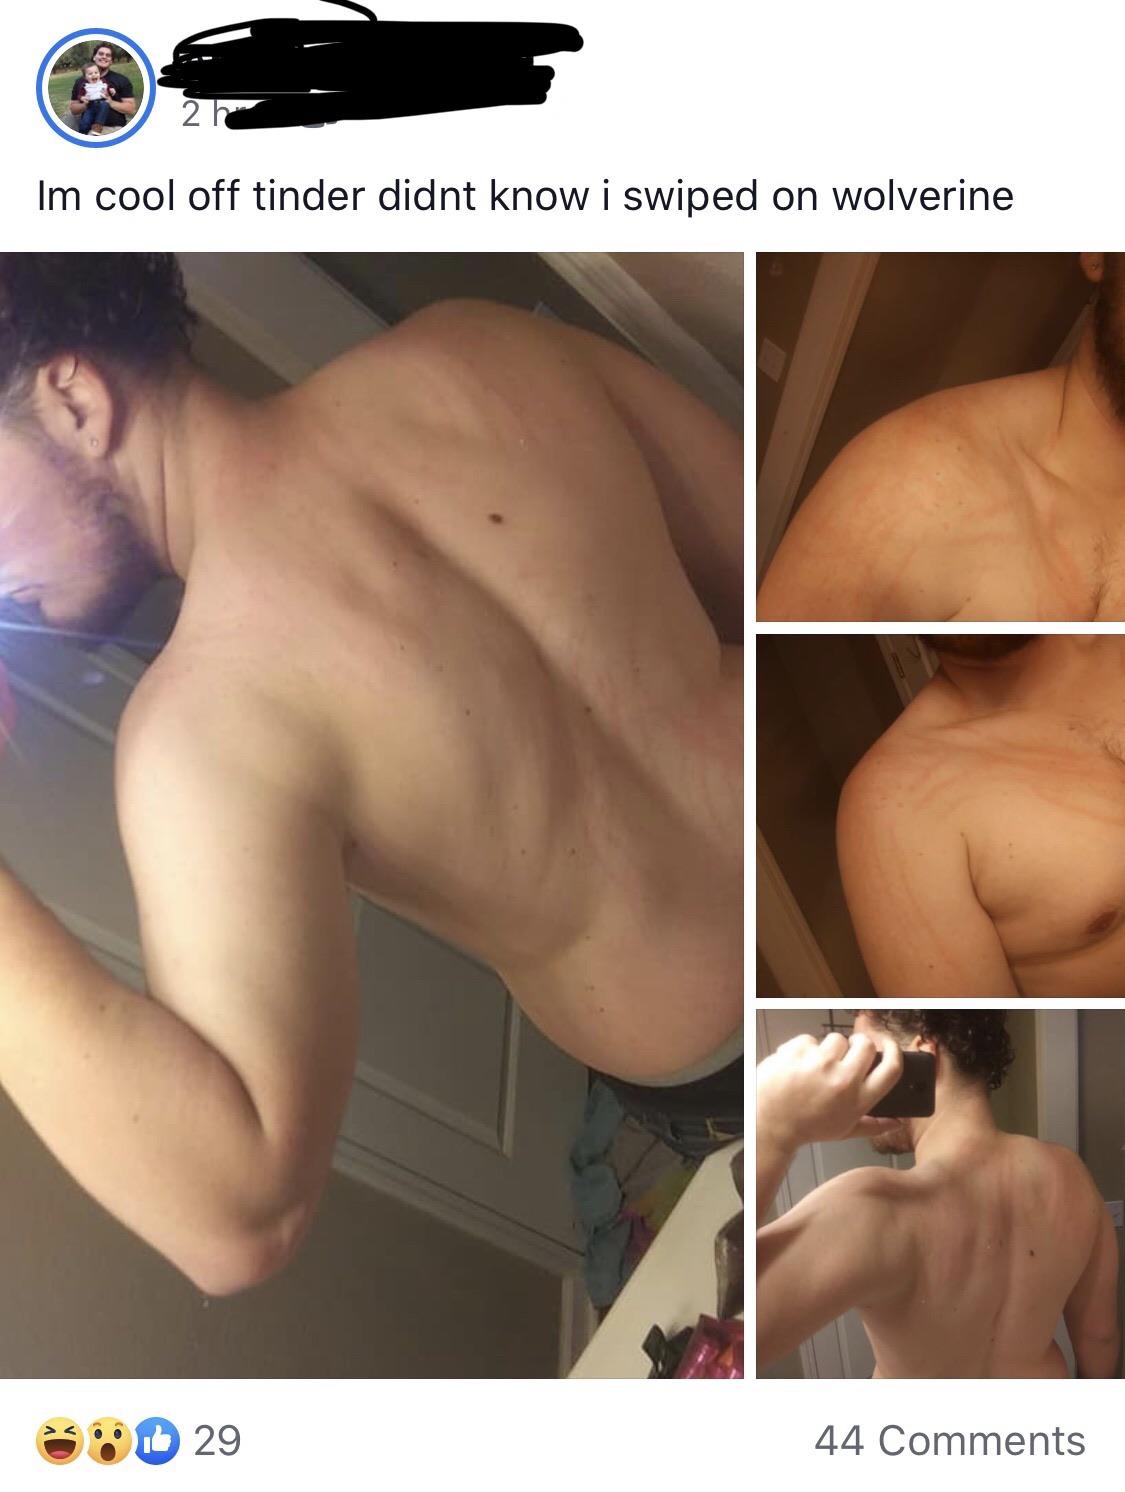 muscle - 2 he Im cool off tinder didnt know i swiped on wolverine 29 44